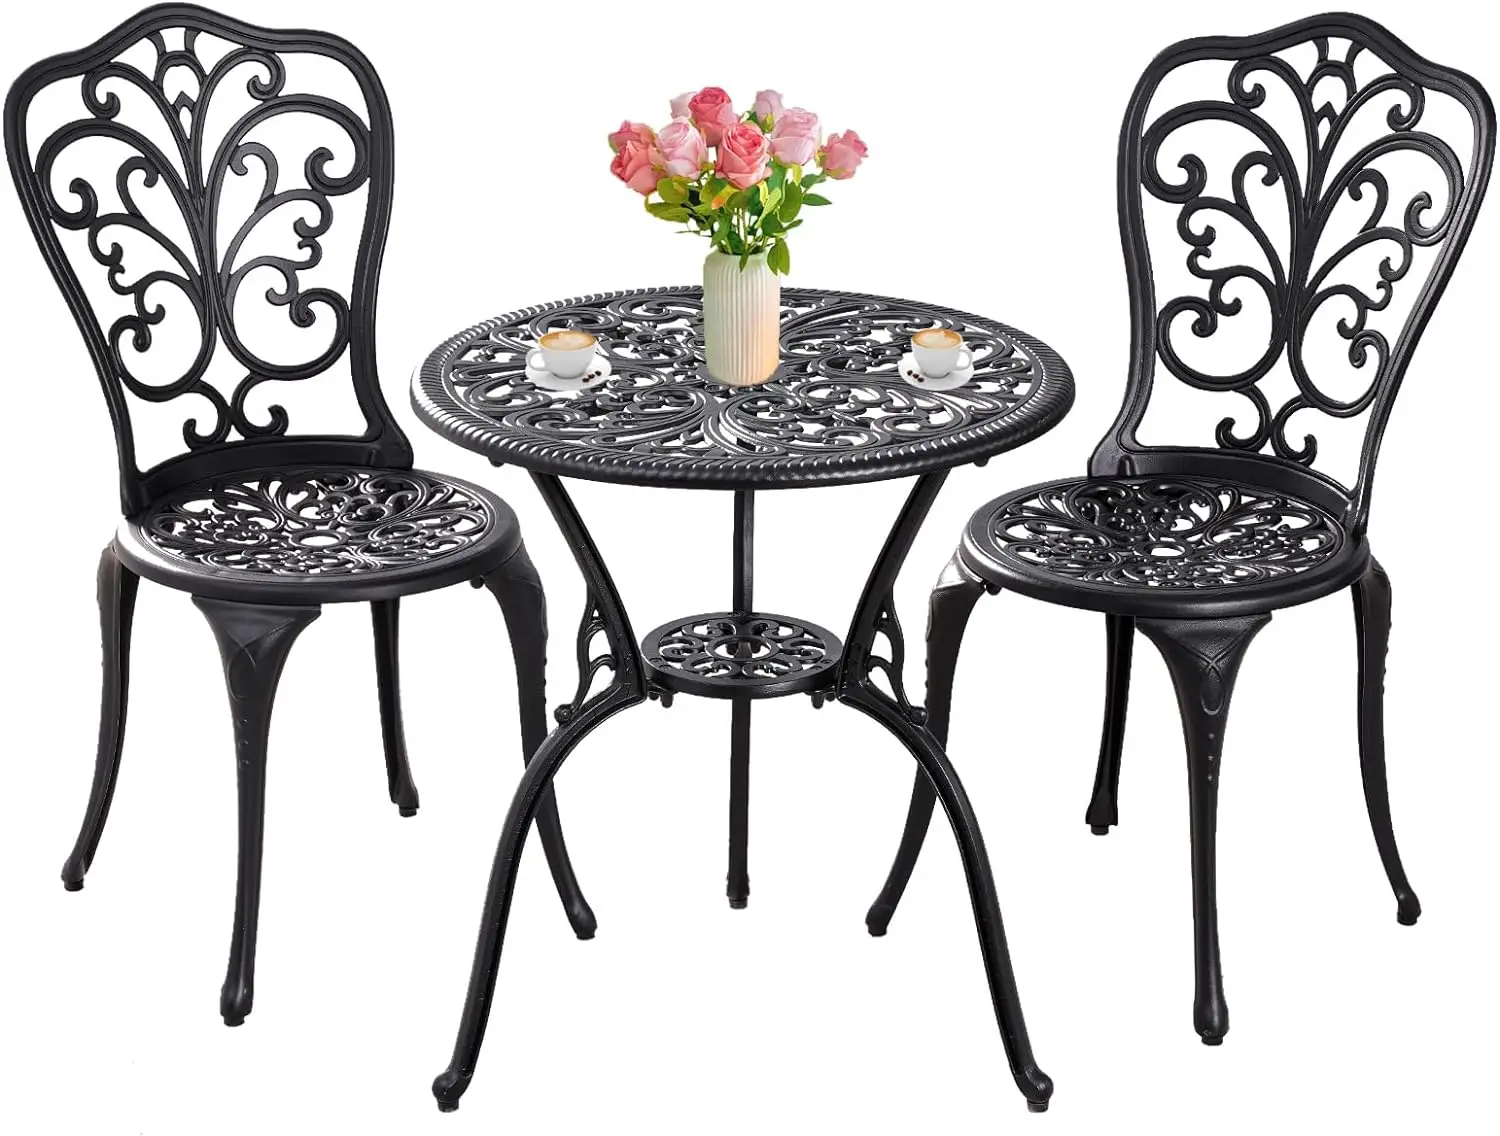 

Patio Bistro Sets 3 Piece Outdoor,Cast Aluminum Bistro Table and Chairs Set of 2 with Umbrella Hole,All Weather Outdoor Bistro